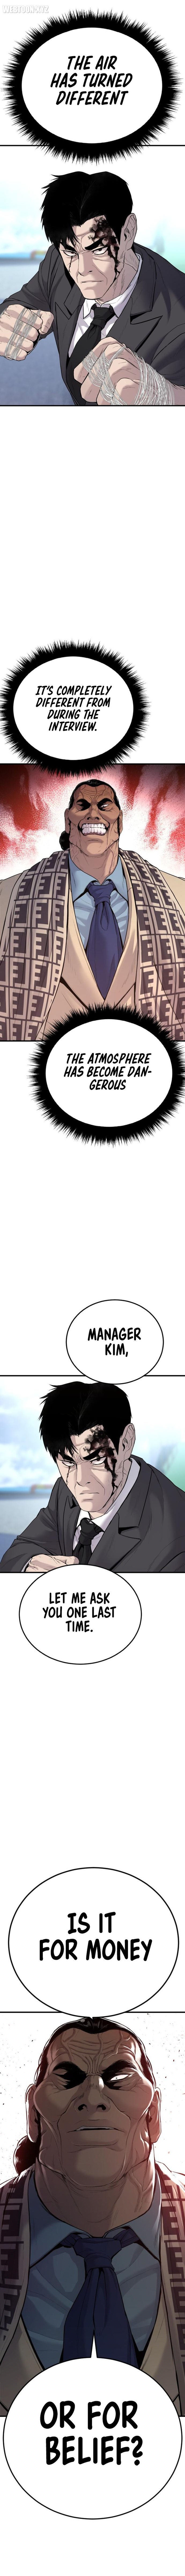 manager-kim-chap-67-3